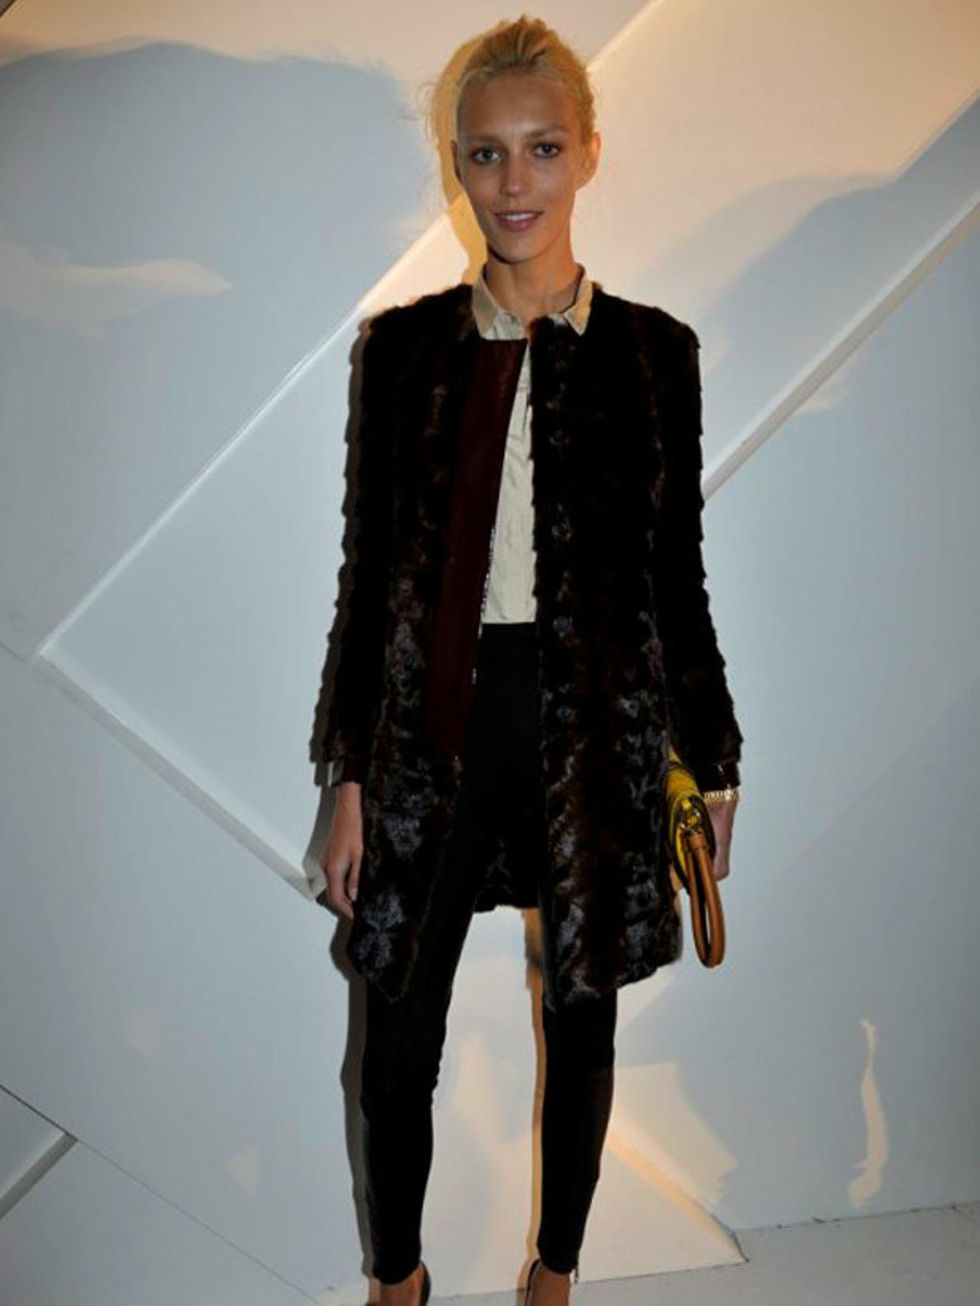 <p>Model <a href="http://www.elleuk.com/news/fashion-news/model-anja-rubik-marries-in-a-mullet-dress">Anja Rubik</a> attends the opening of <a href="http://www.elleuk.com/news/star-style-news/burberry-takes-paris/(gid)/832074">Burberry's flagship store in